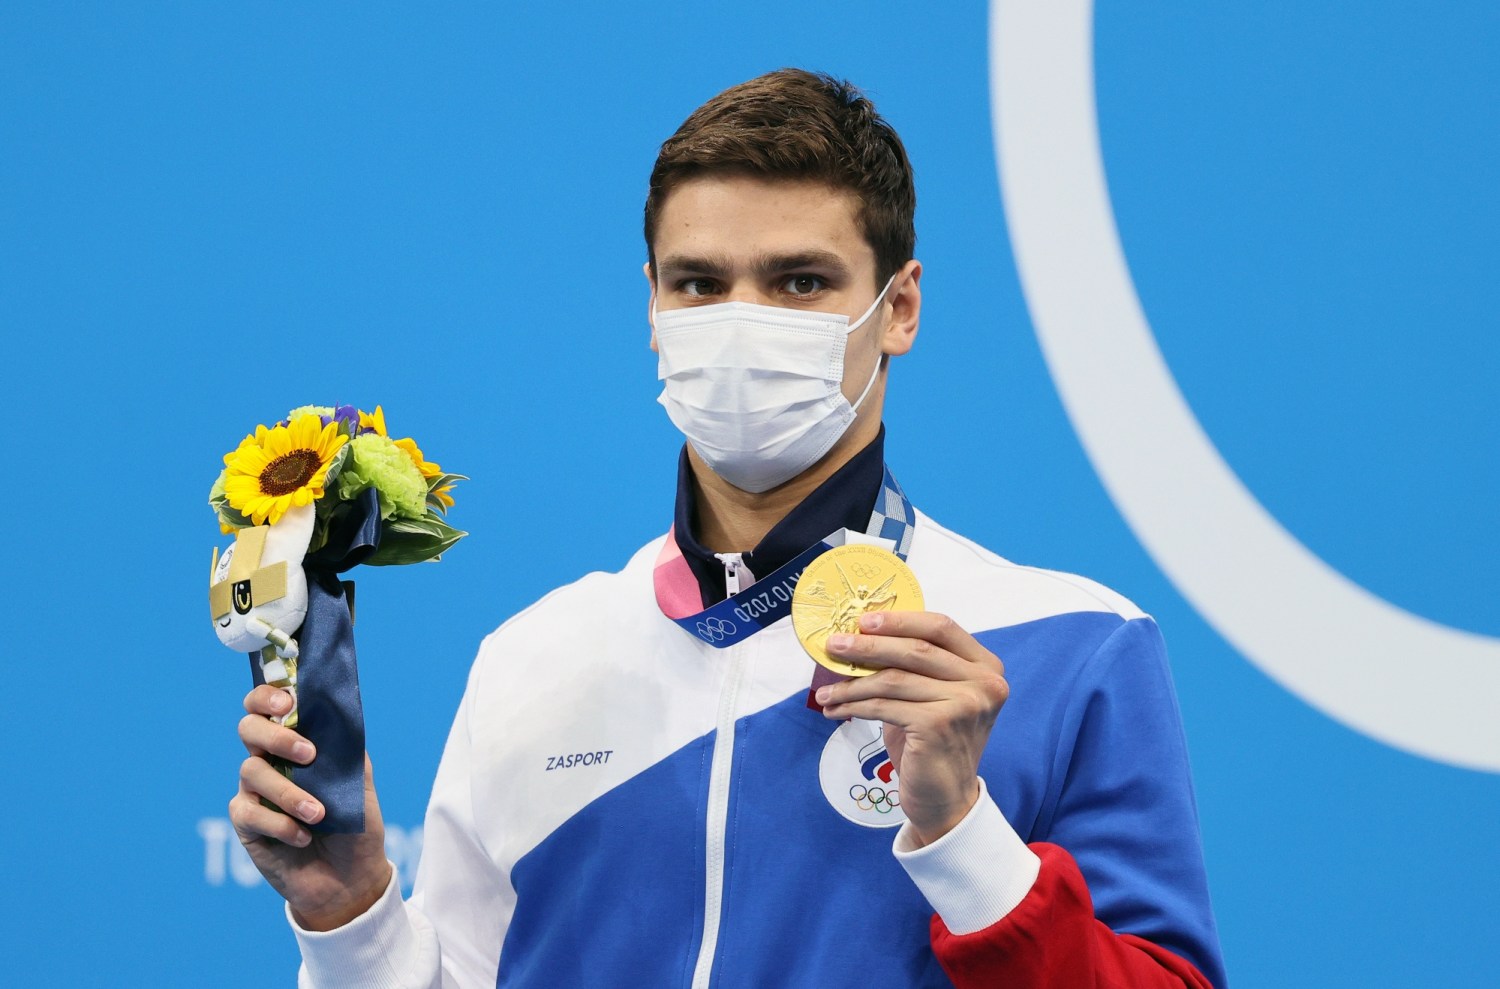 Olympian Insists To Wear His Favorite Cat Mask For The Medal Ceremony